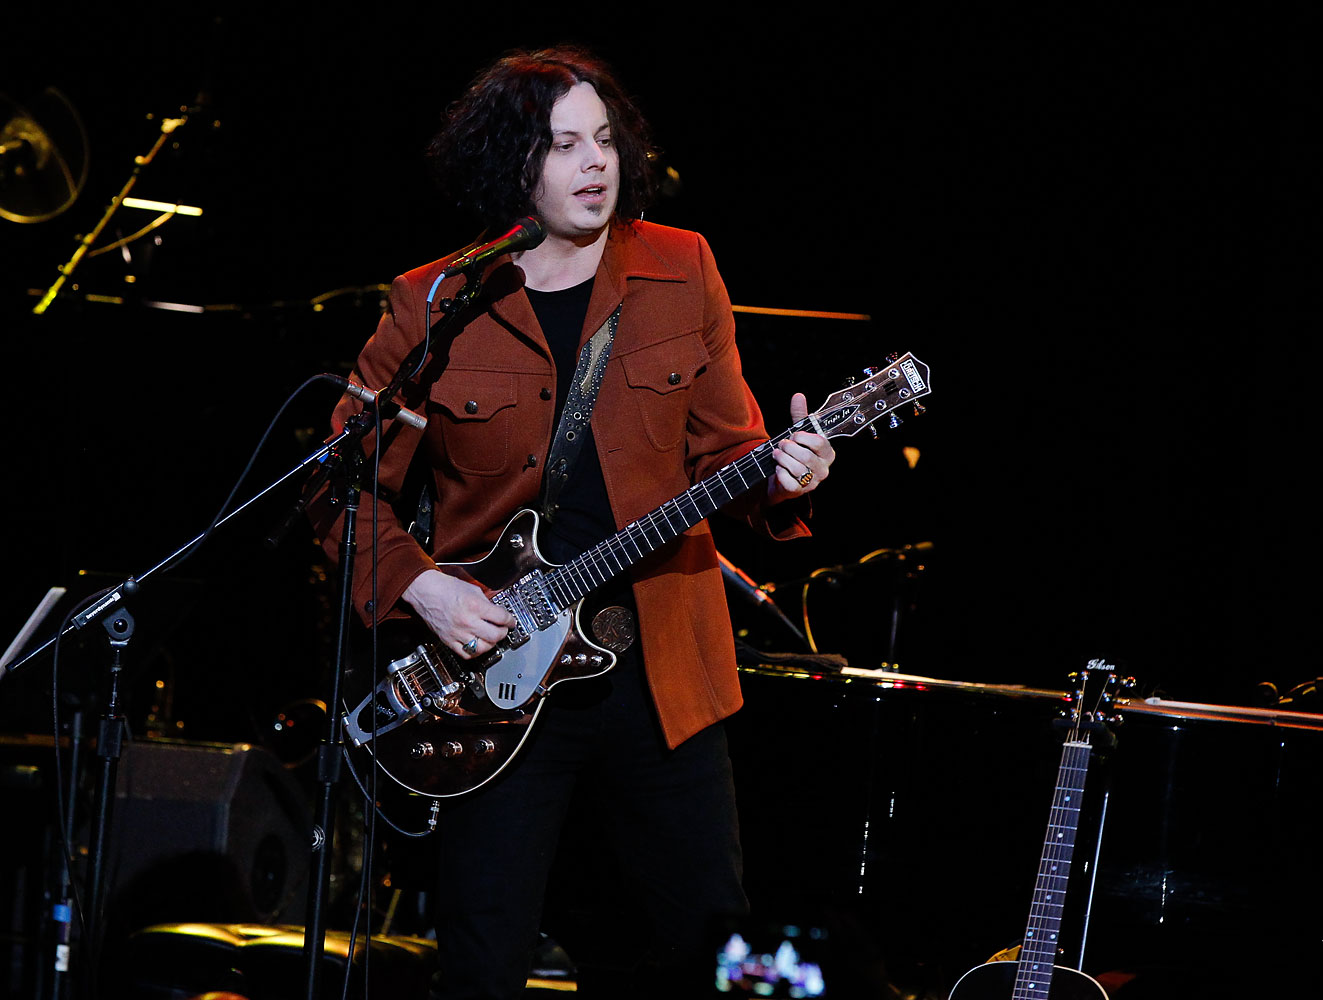 Jack White performs during Brendan Benson and Friends at the Ryman Auditorium on Dec. 18, 2013 in Nashville. (Terry Wyatt—Getty Images)